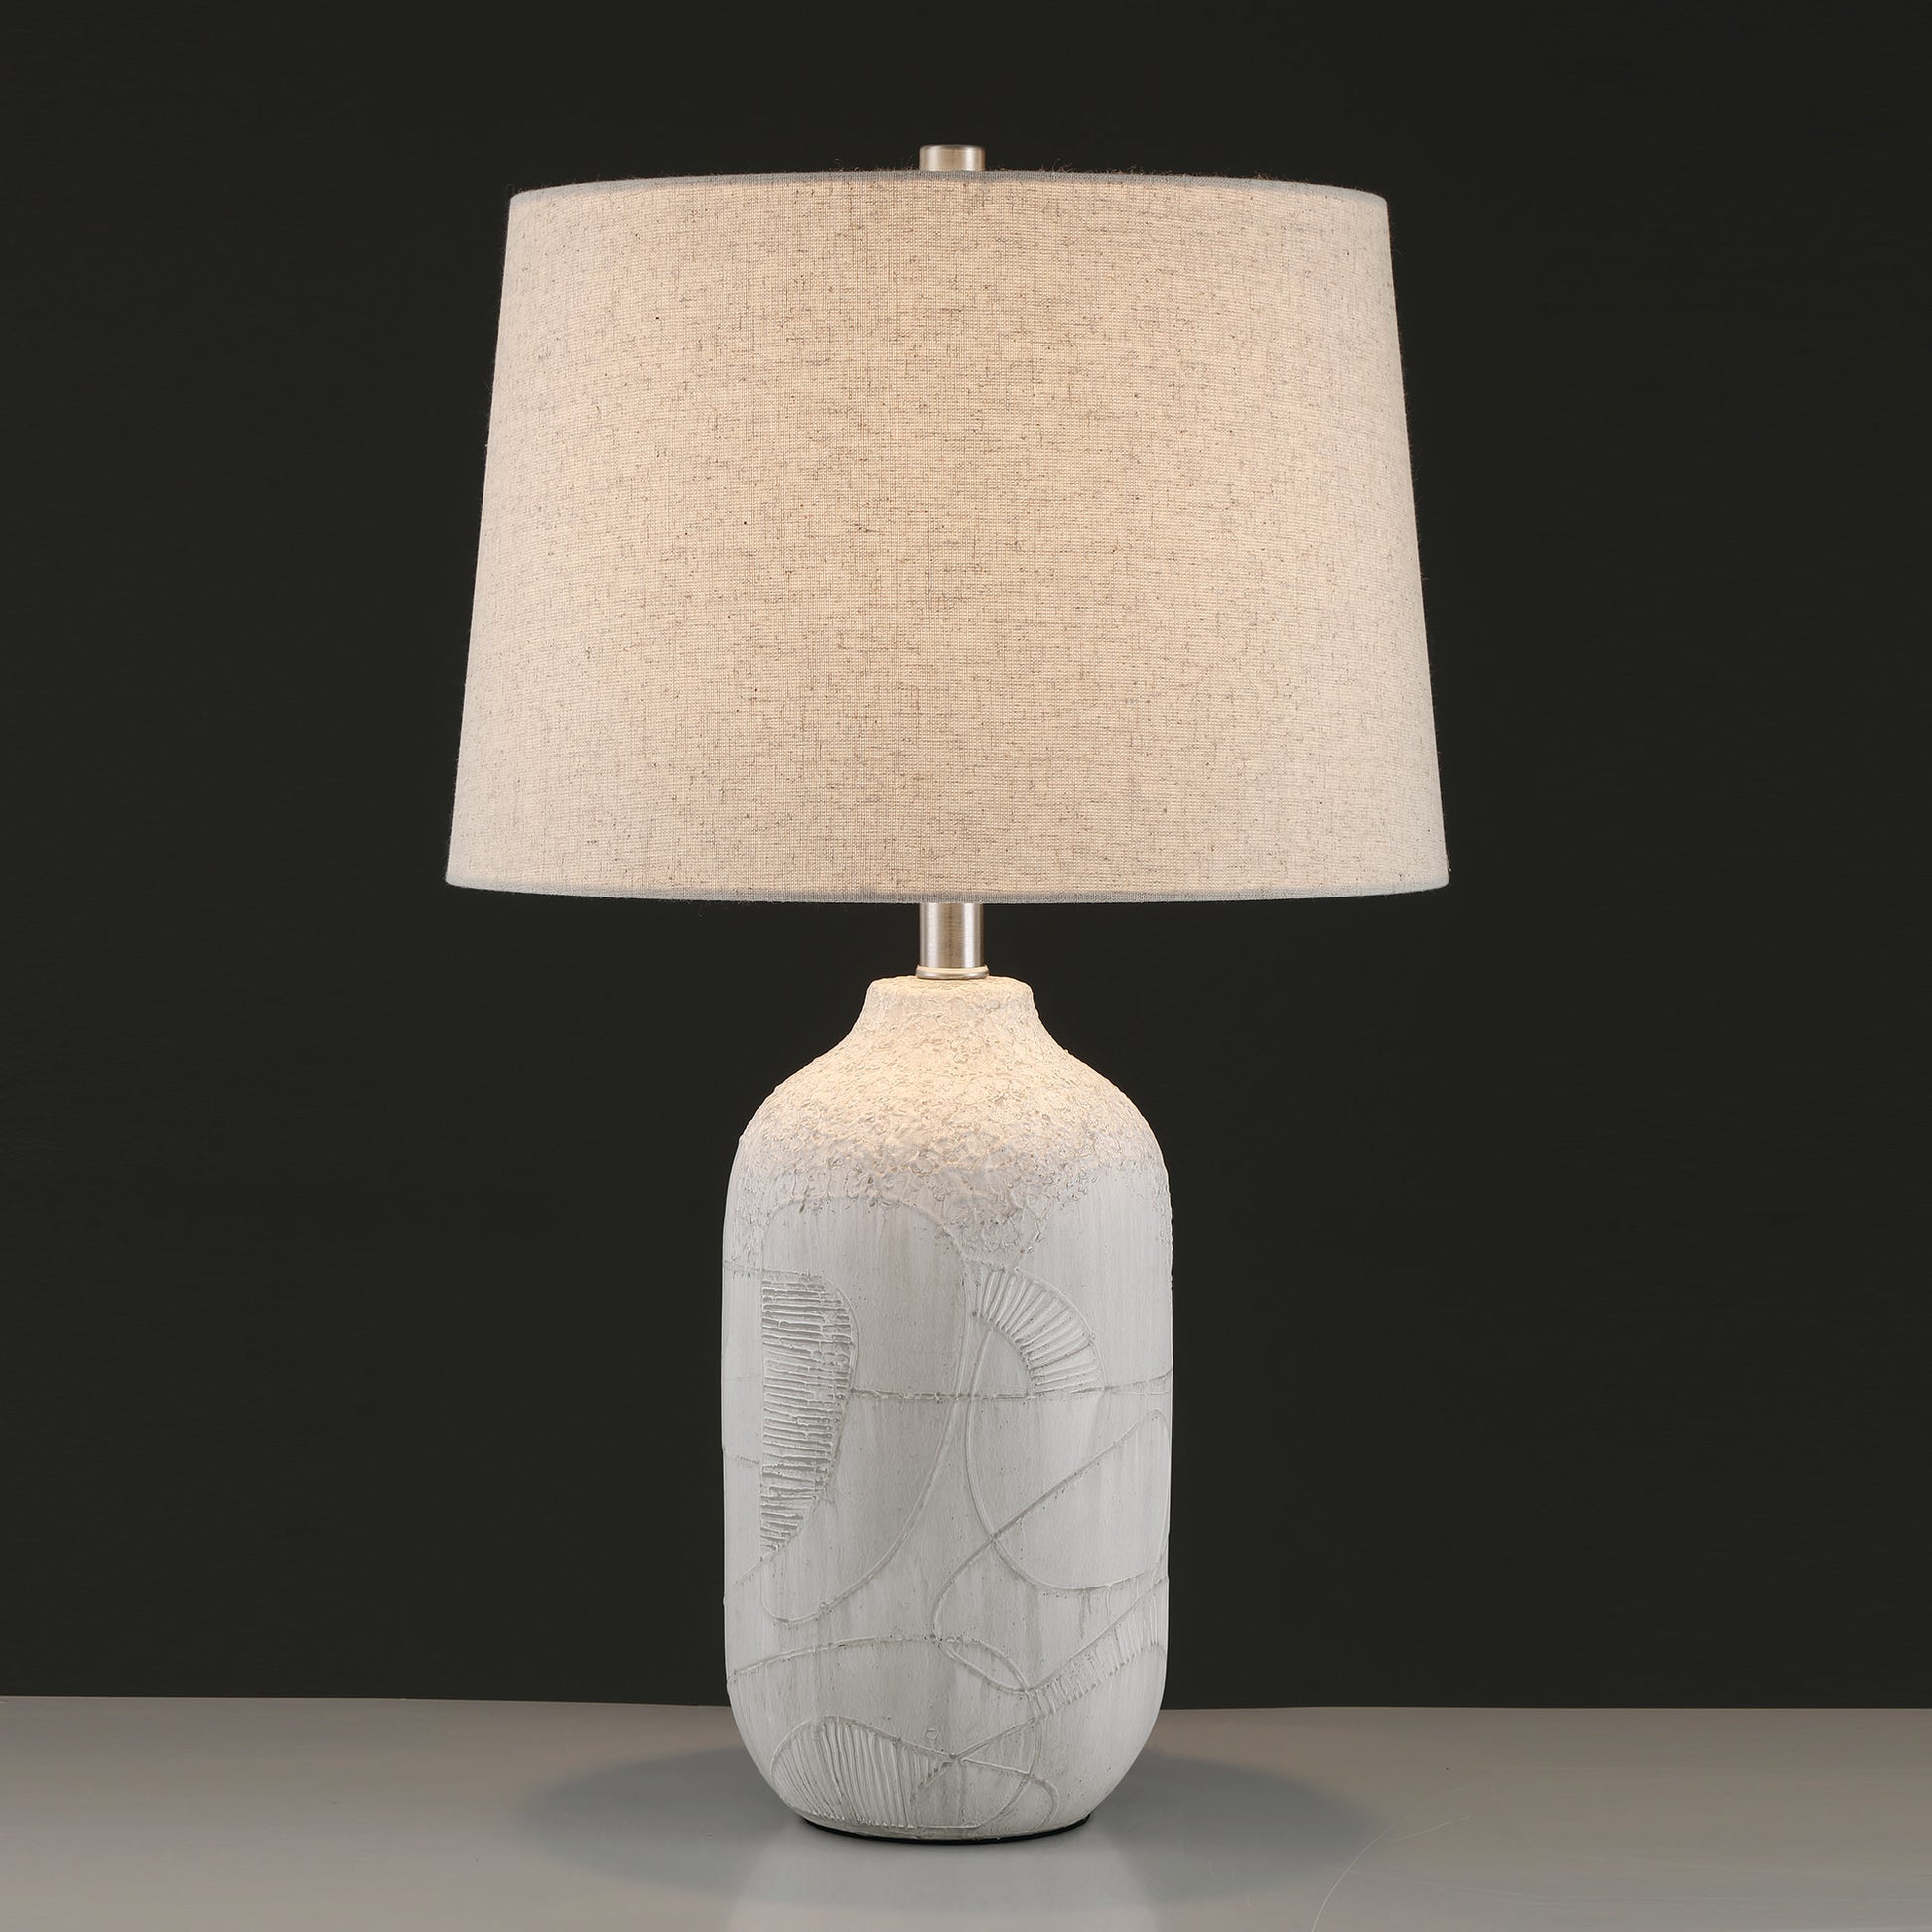 1 light linen ceramic table lamp set of 2 (2) by ACROMA